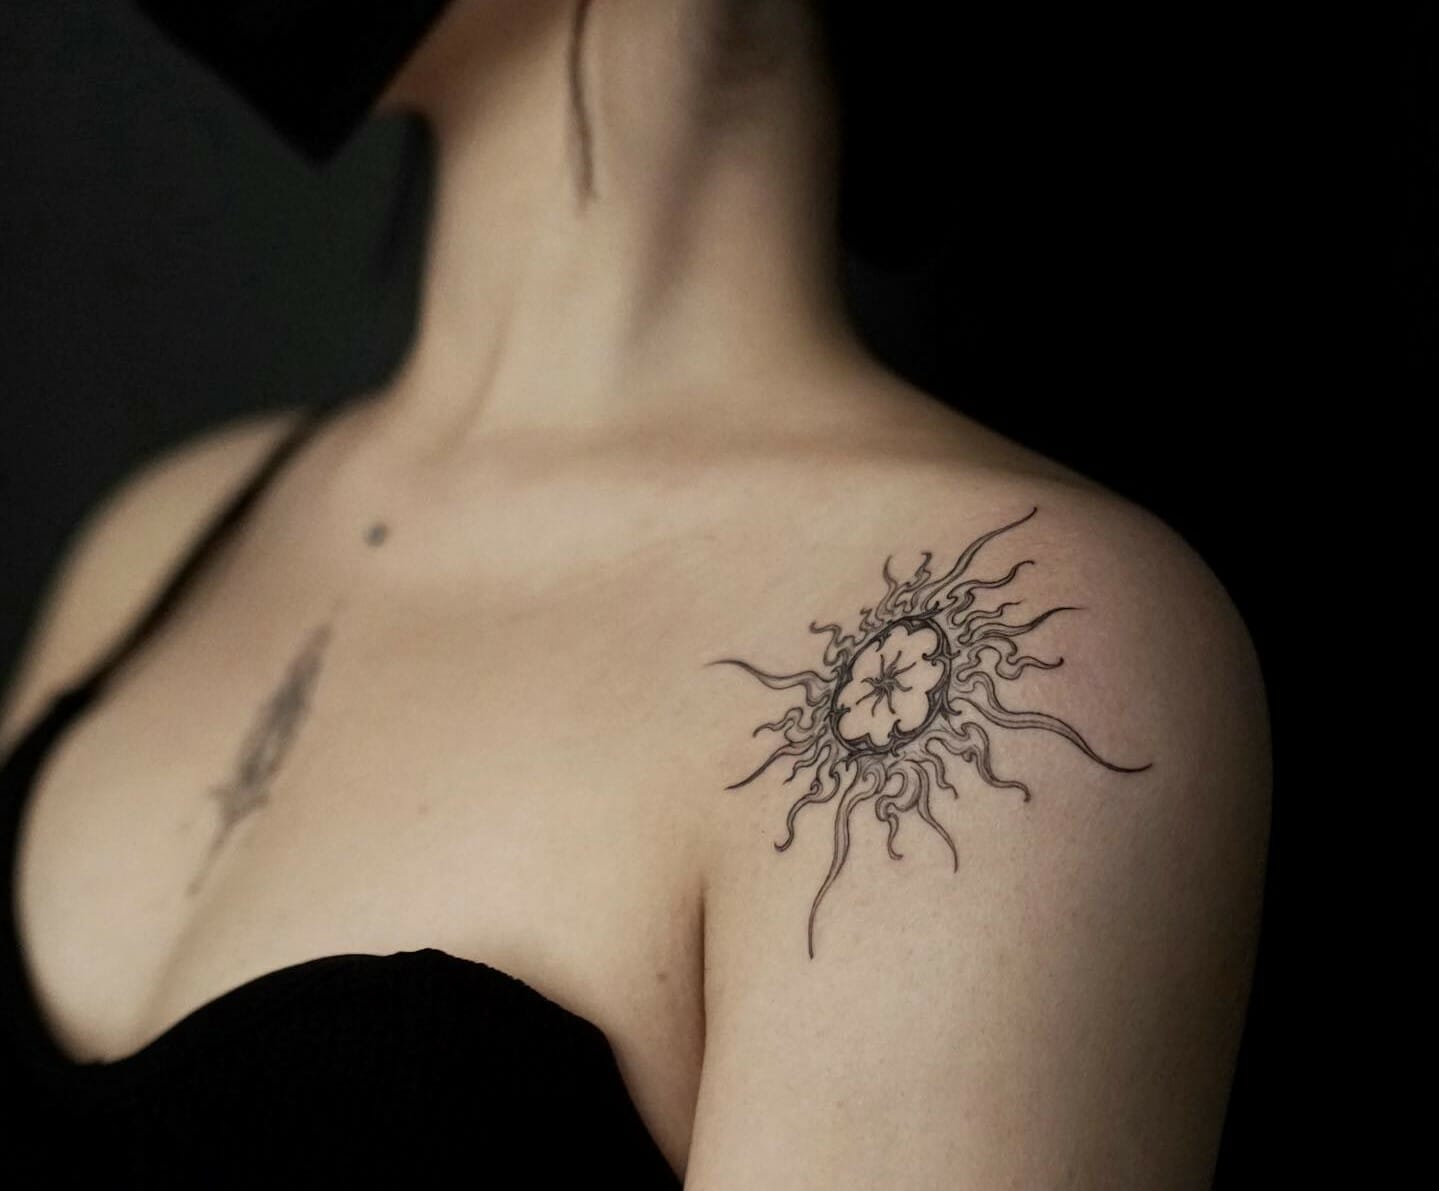 10 Shoulder Sun Tattoo Ideas That Will Blow Your Mind  alexie